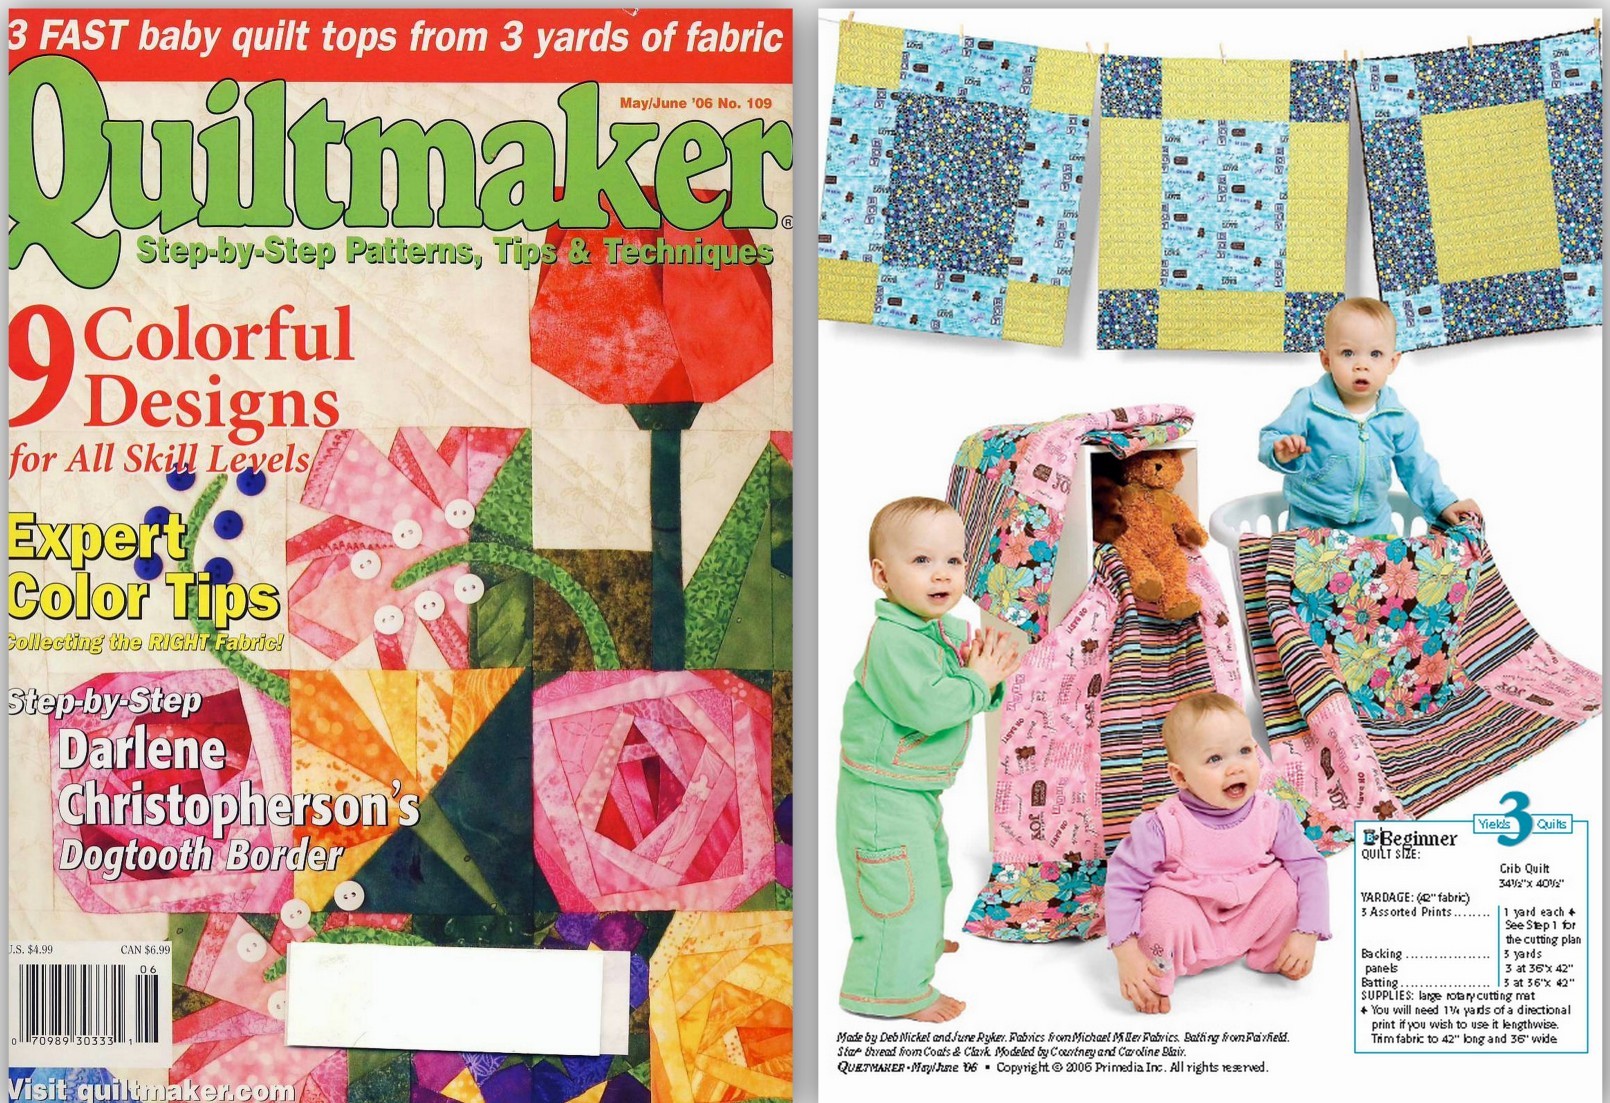 Quiltmaker Magazine May/June ’06 No. 109 included “3 FAST easy quilt tops from 3 yards of fabric